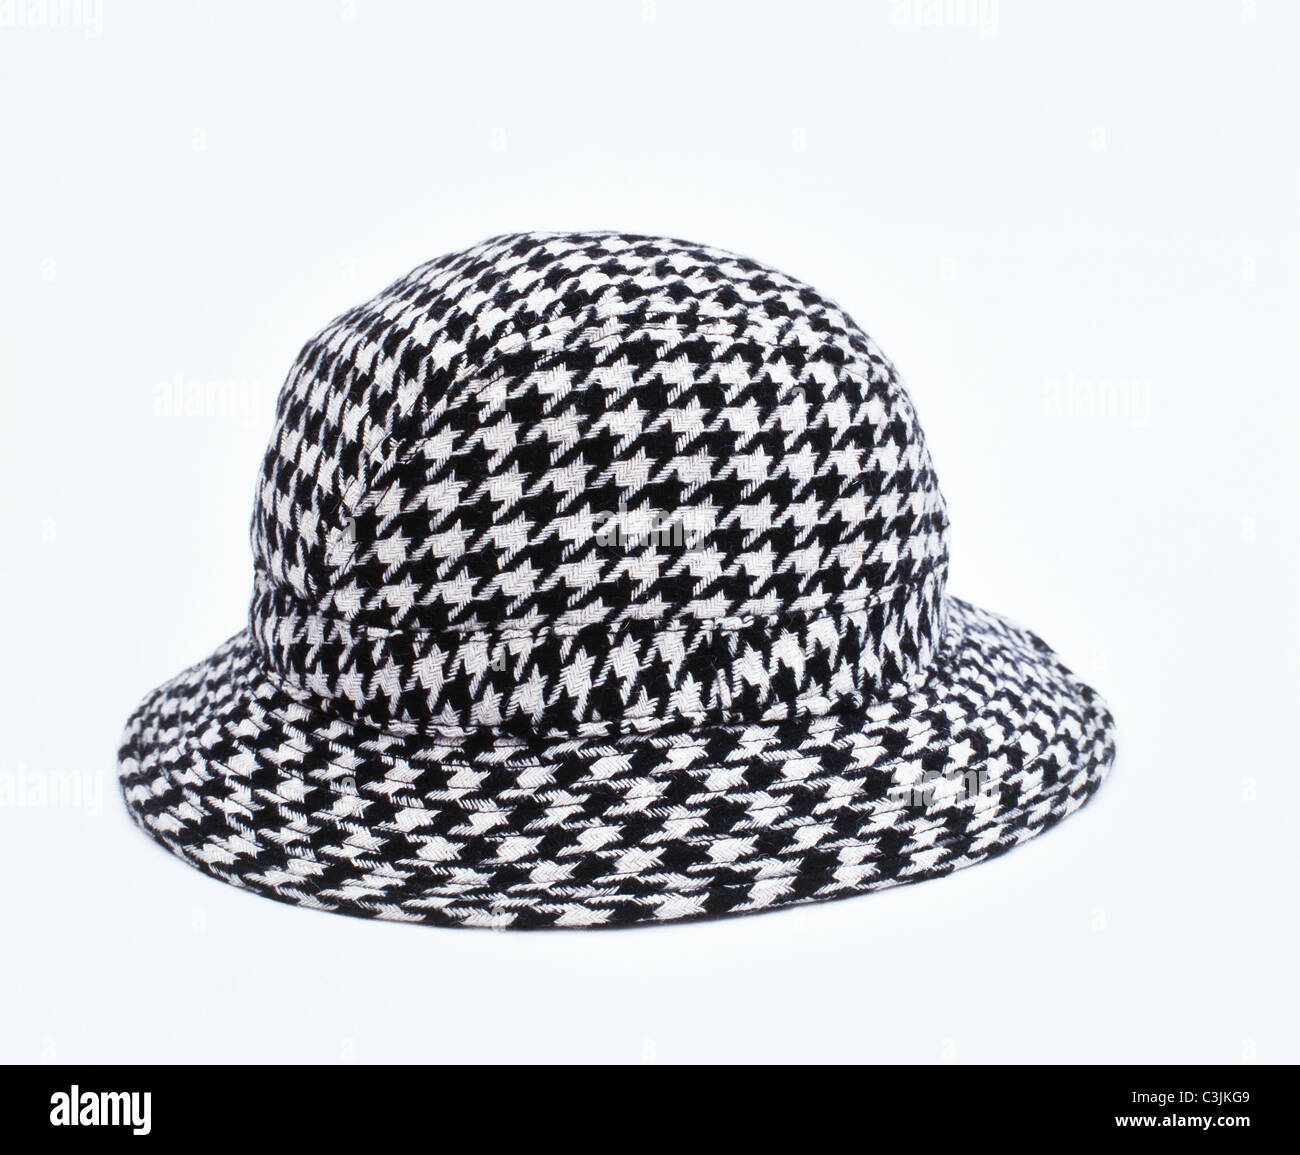 Hounds Tooth wool hat. Banque D'Images